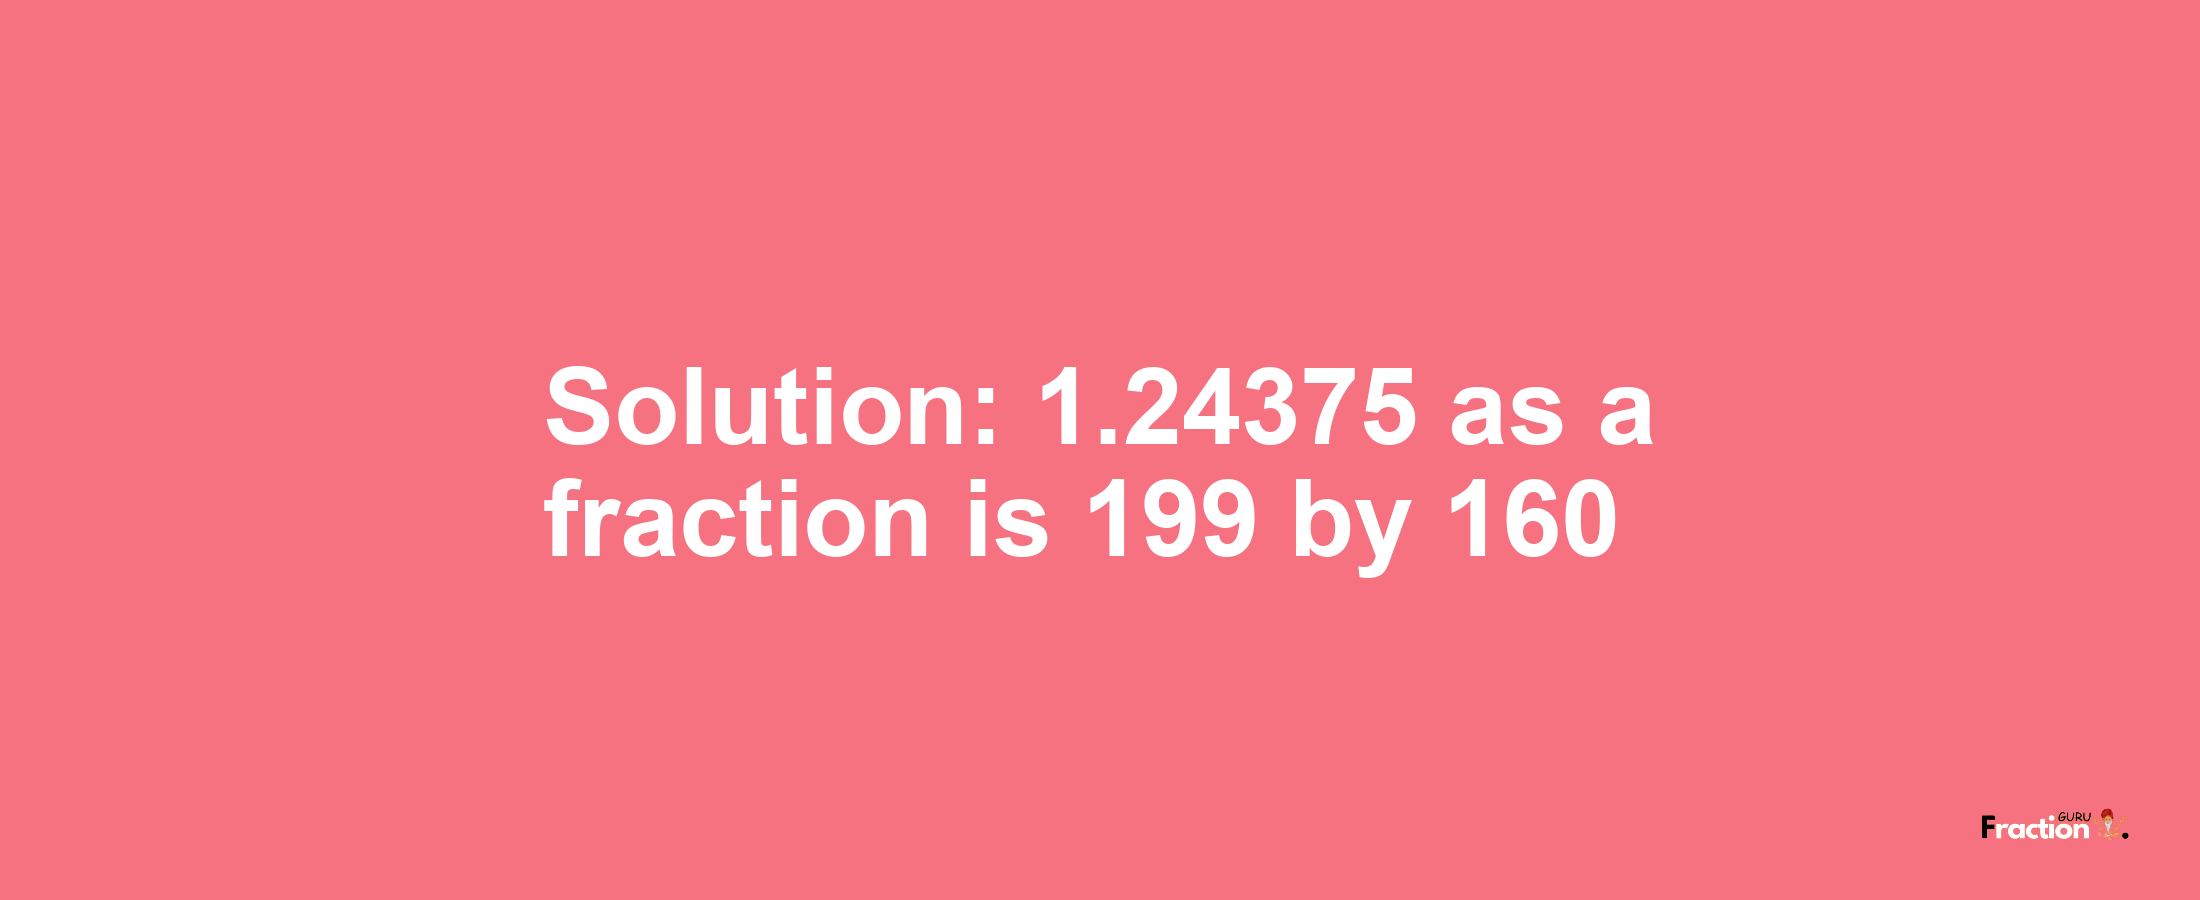 Solution:1.24375 as a fraction is 199/160